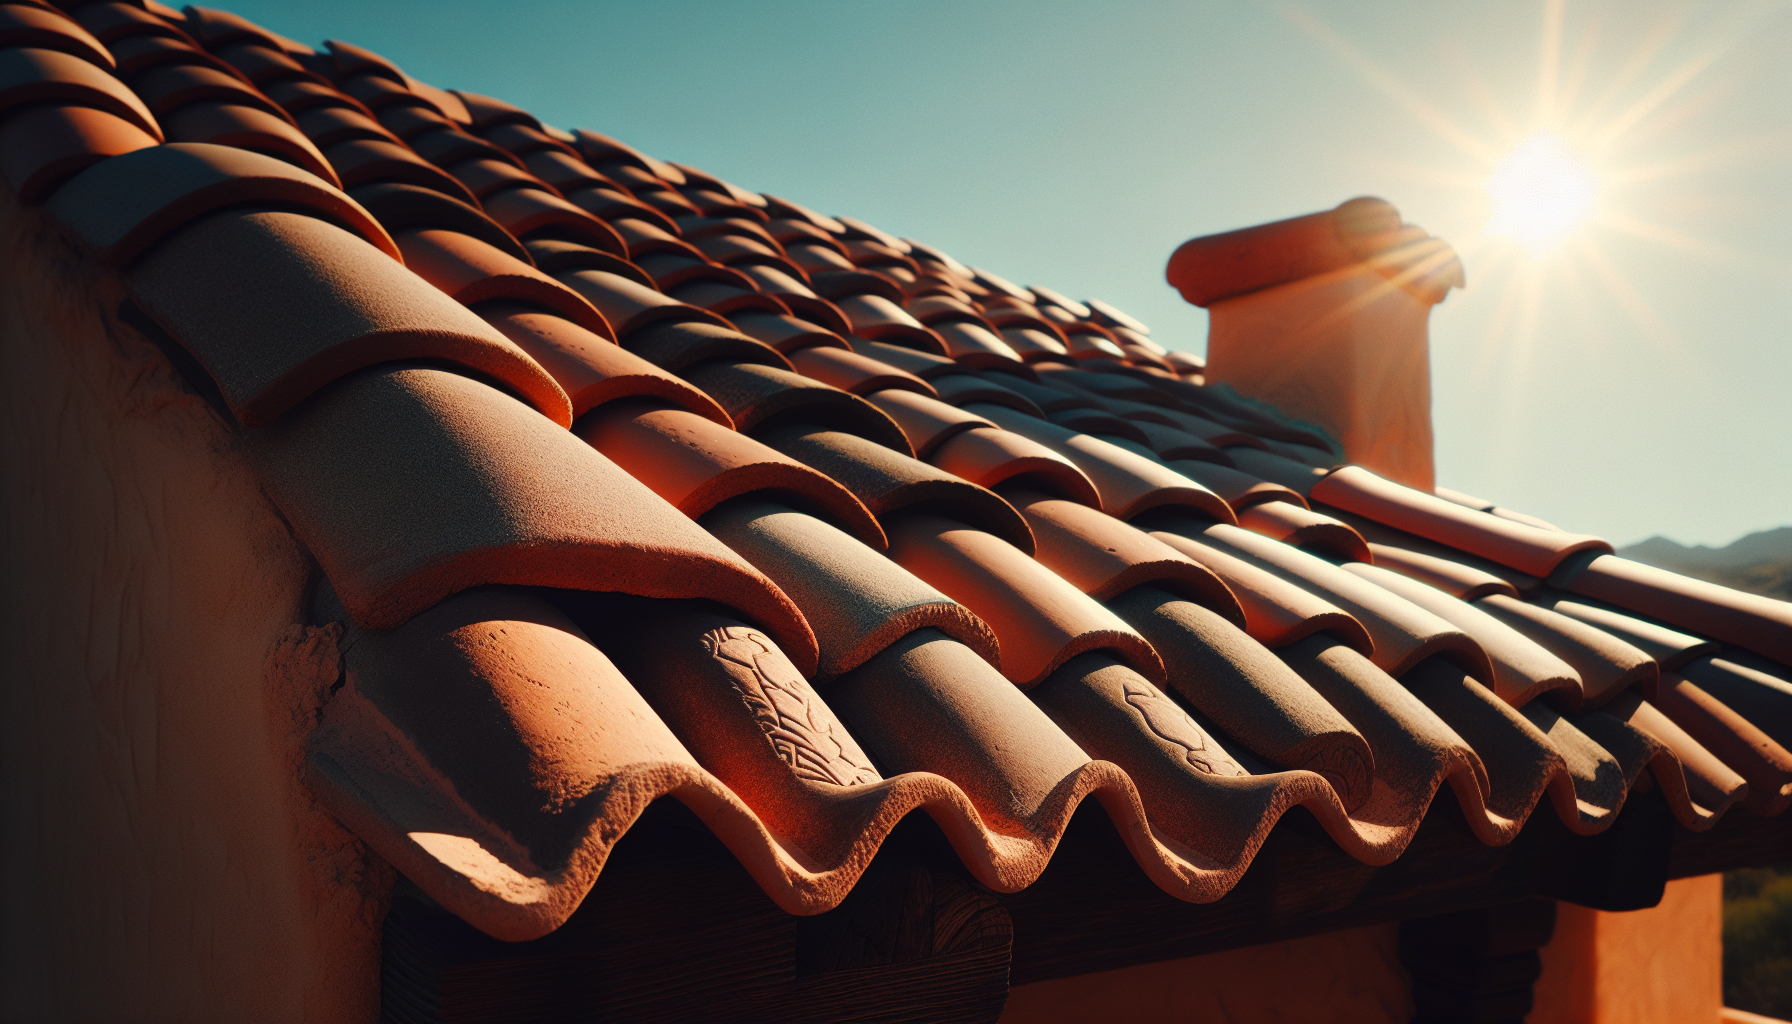 Clay tiles in Arizona's roofing history